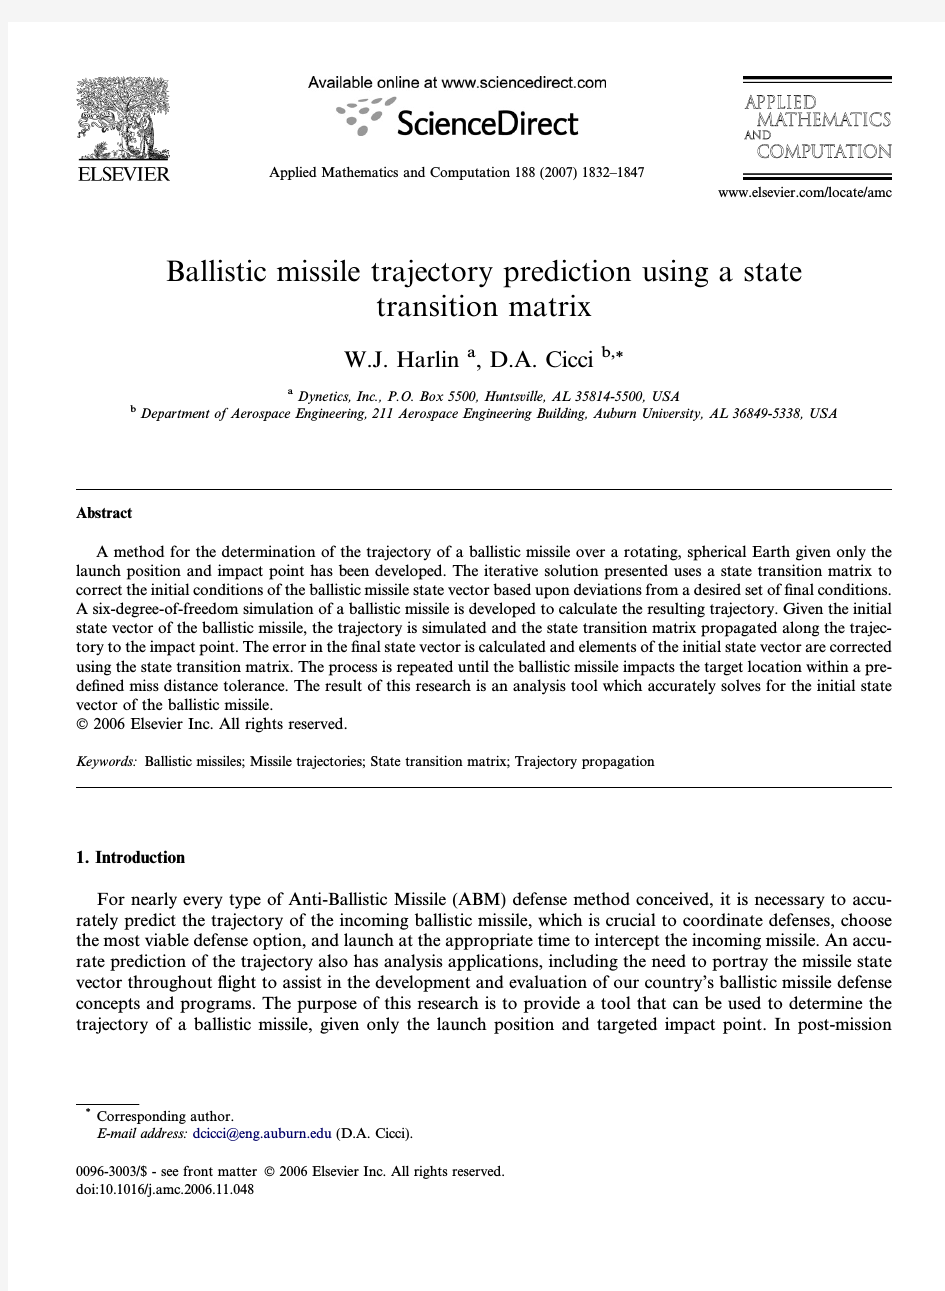 Ballistic missile trajectory prediction using a state